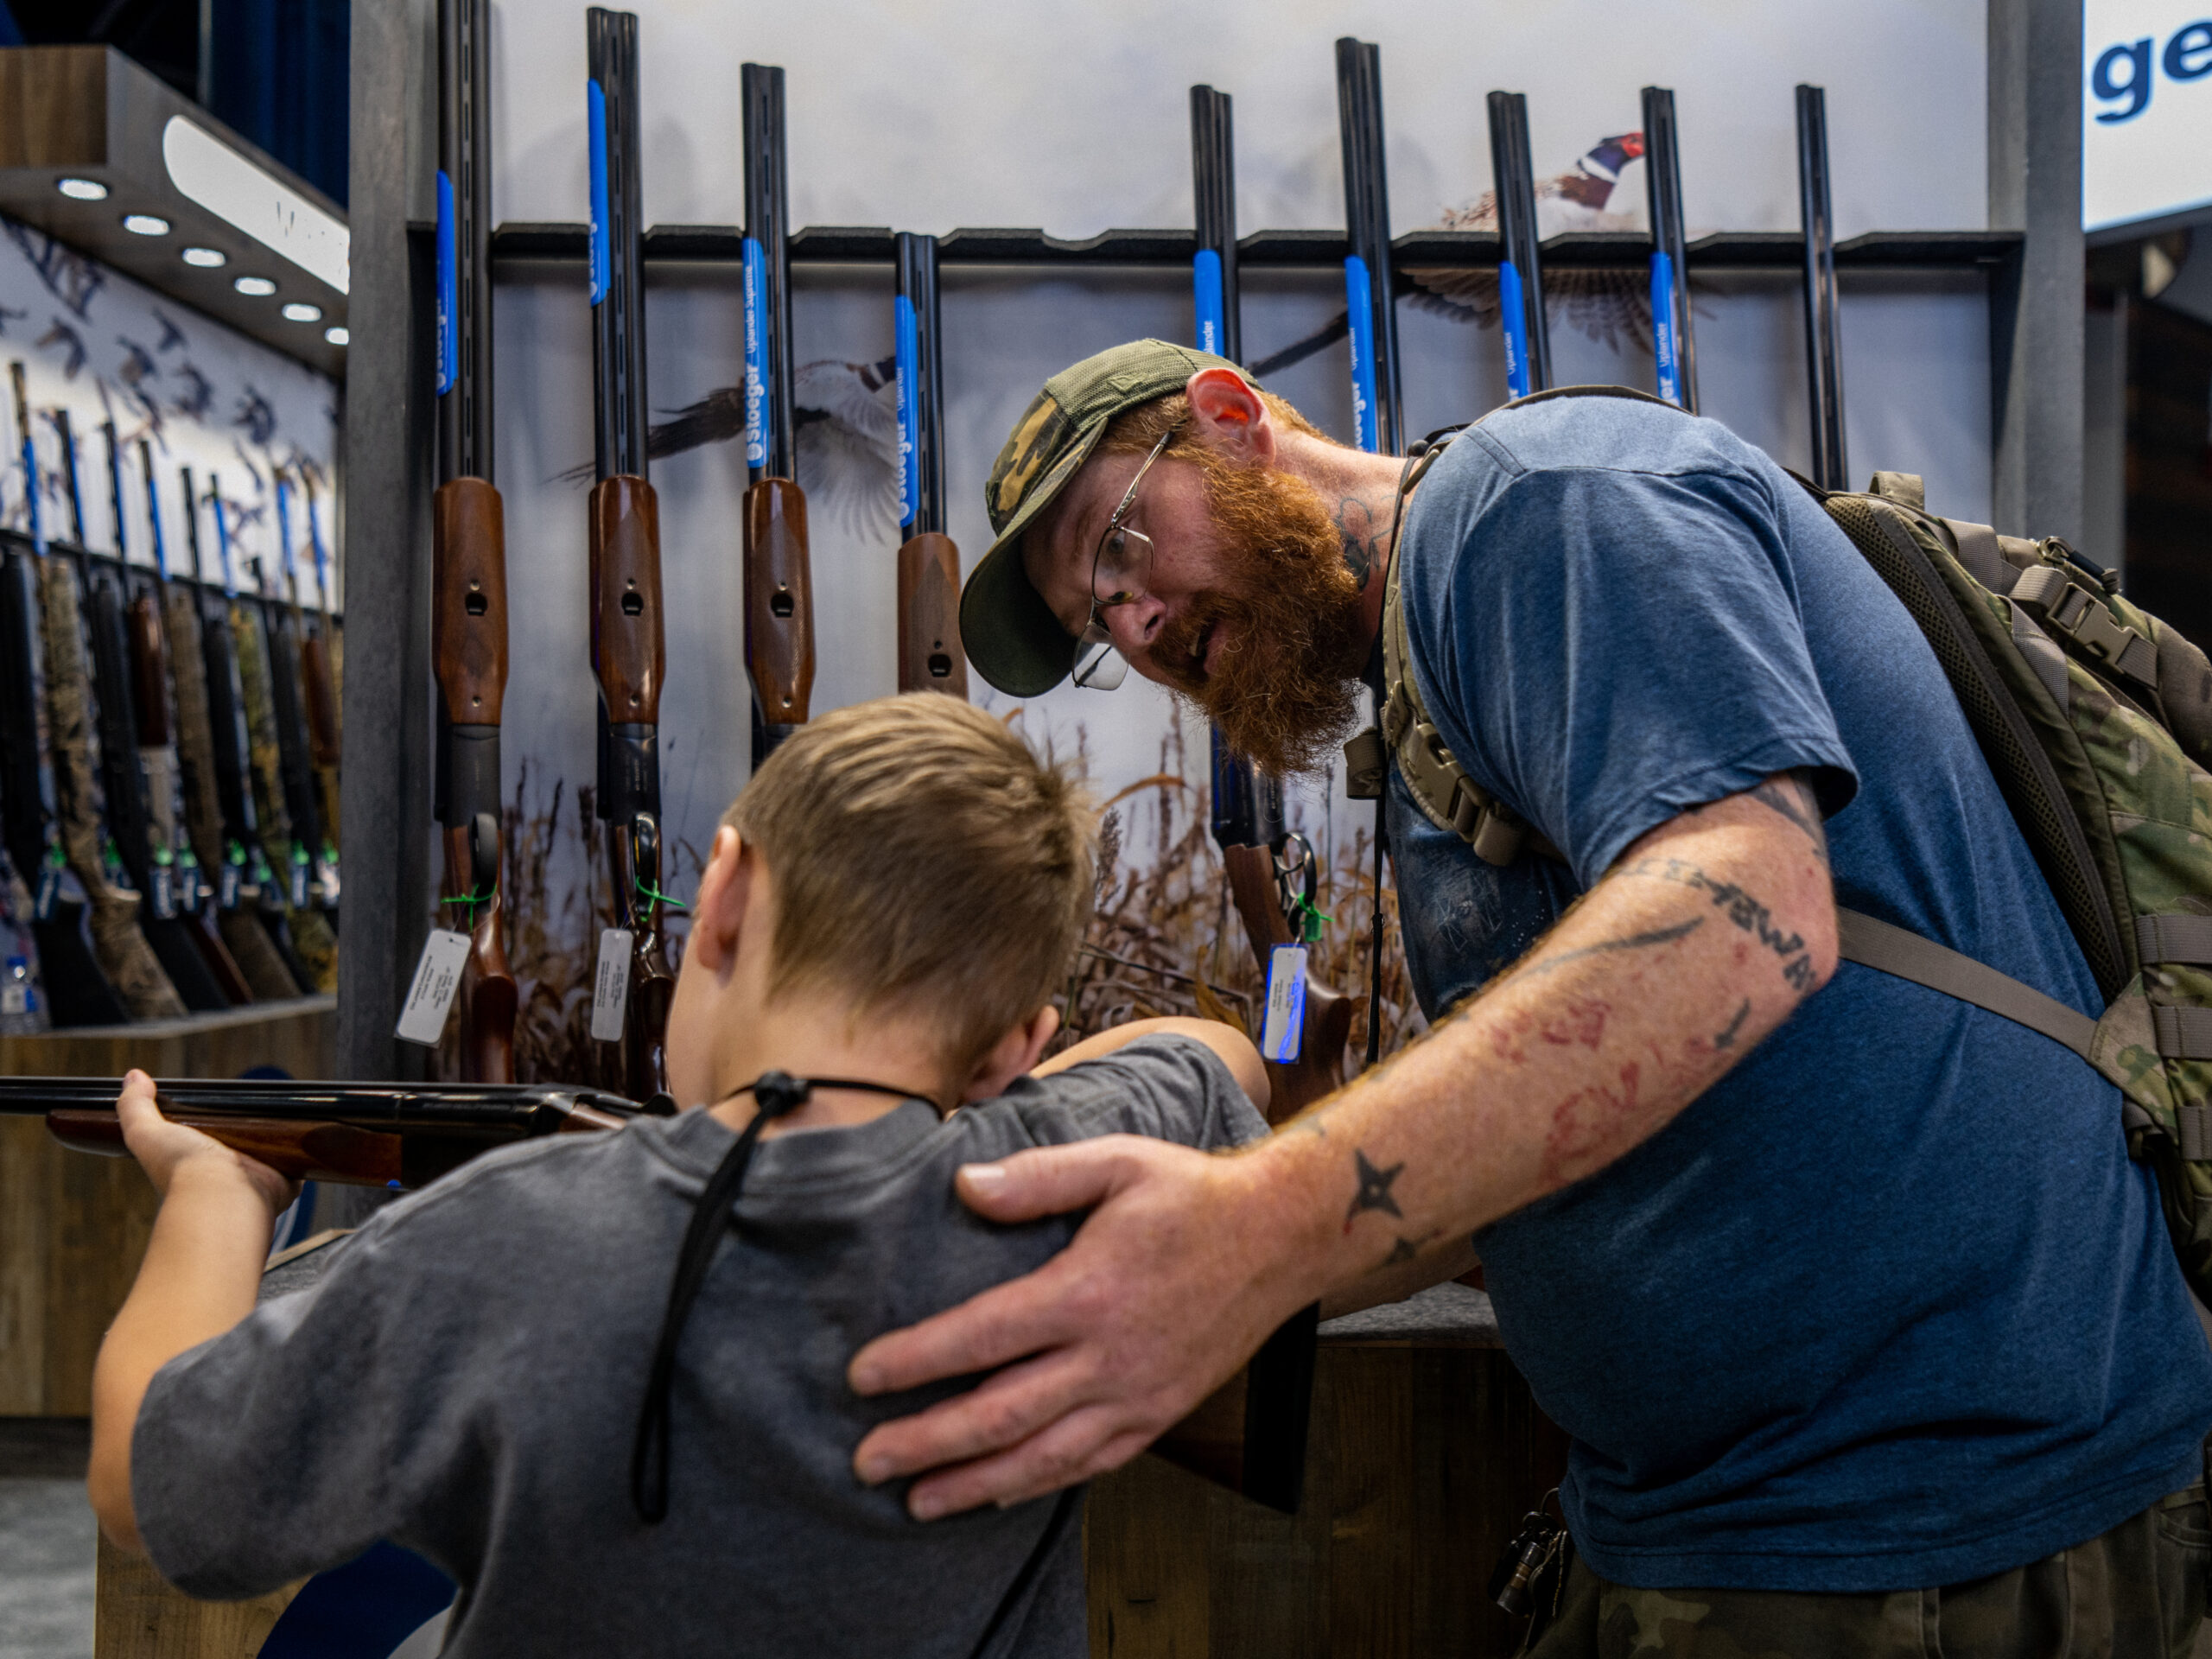 A father helps his son steady a firearm at the National Rifle Association (NRA) annual convention on May 28, 2022, in Houston, Texas. Exposing children to guns comes with risks, but some firearms enthusiasts say they'd prefer to train kids to use guns responsibly.